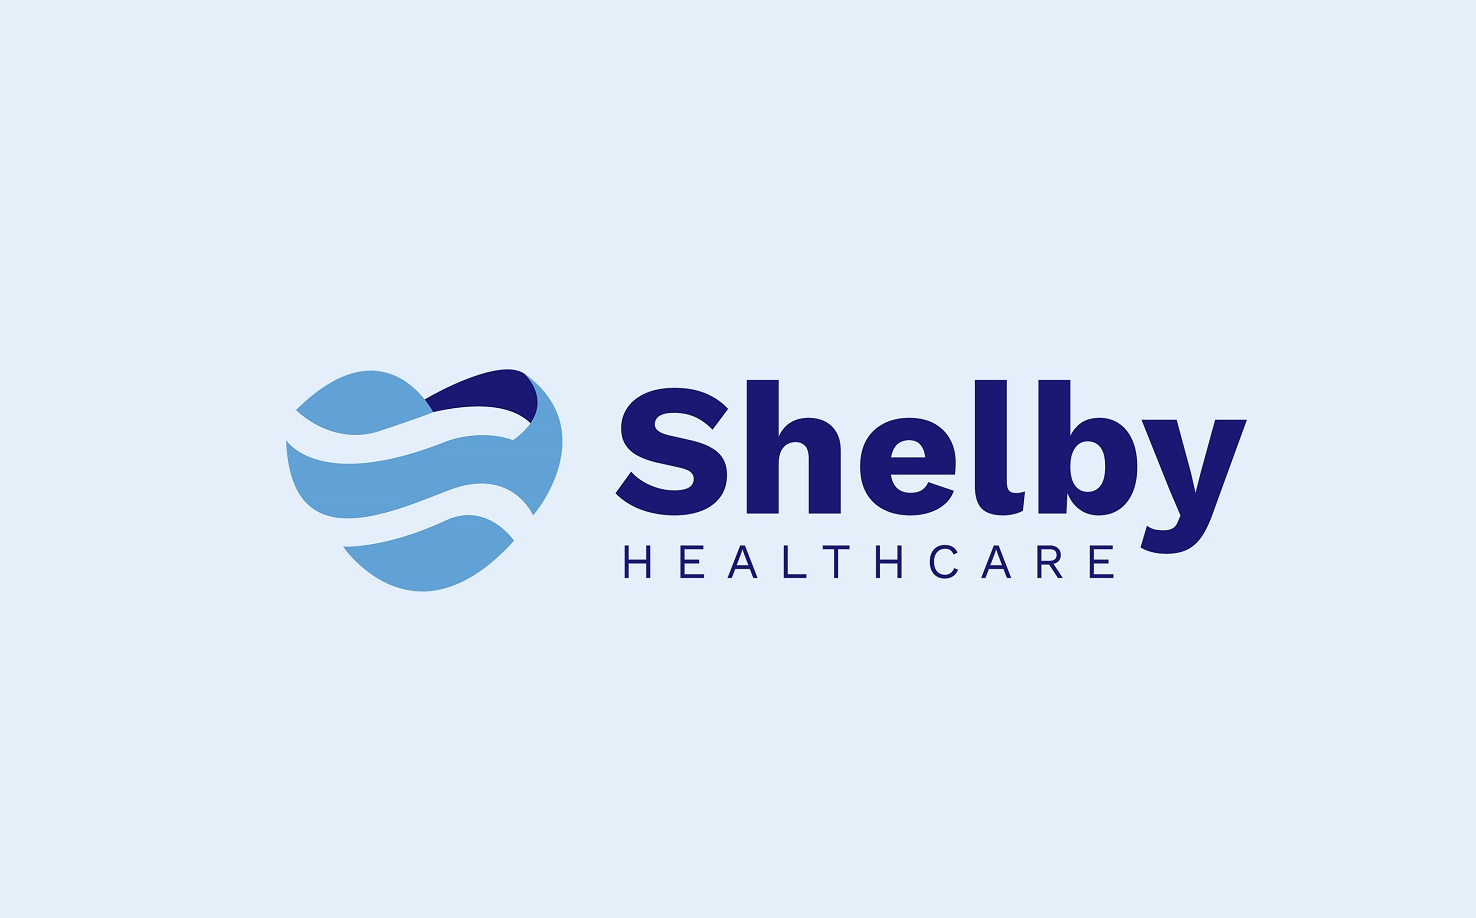 Shelby Healthcare image